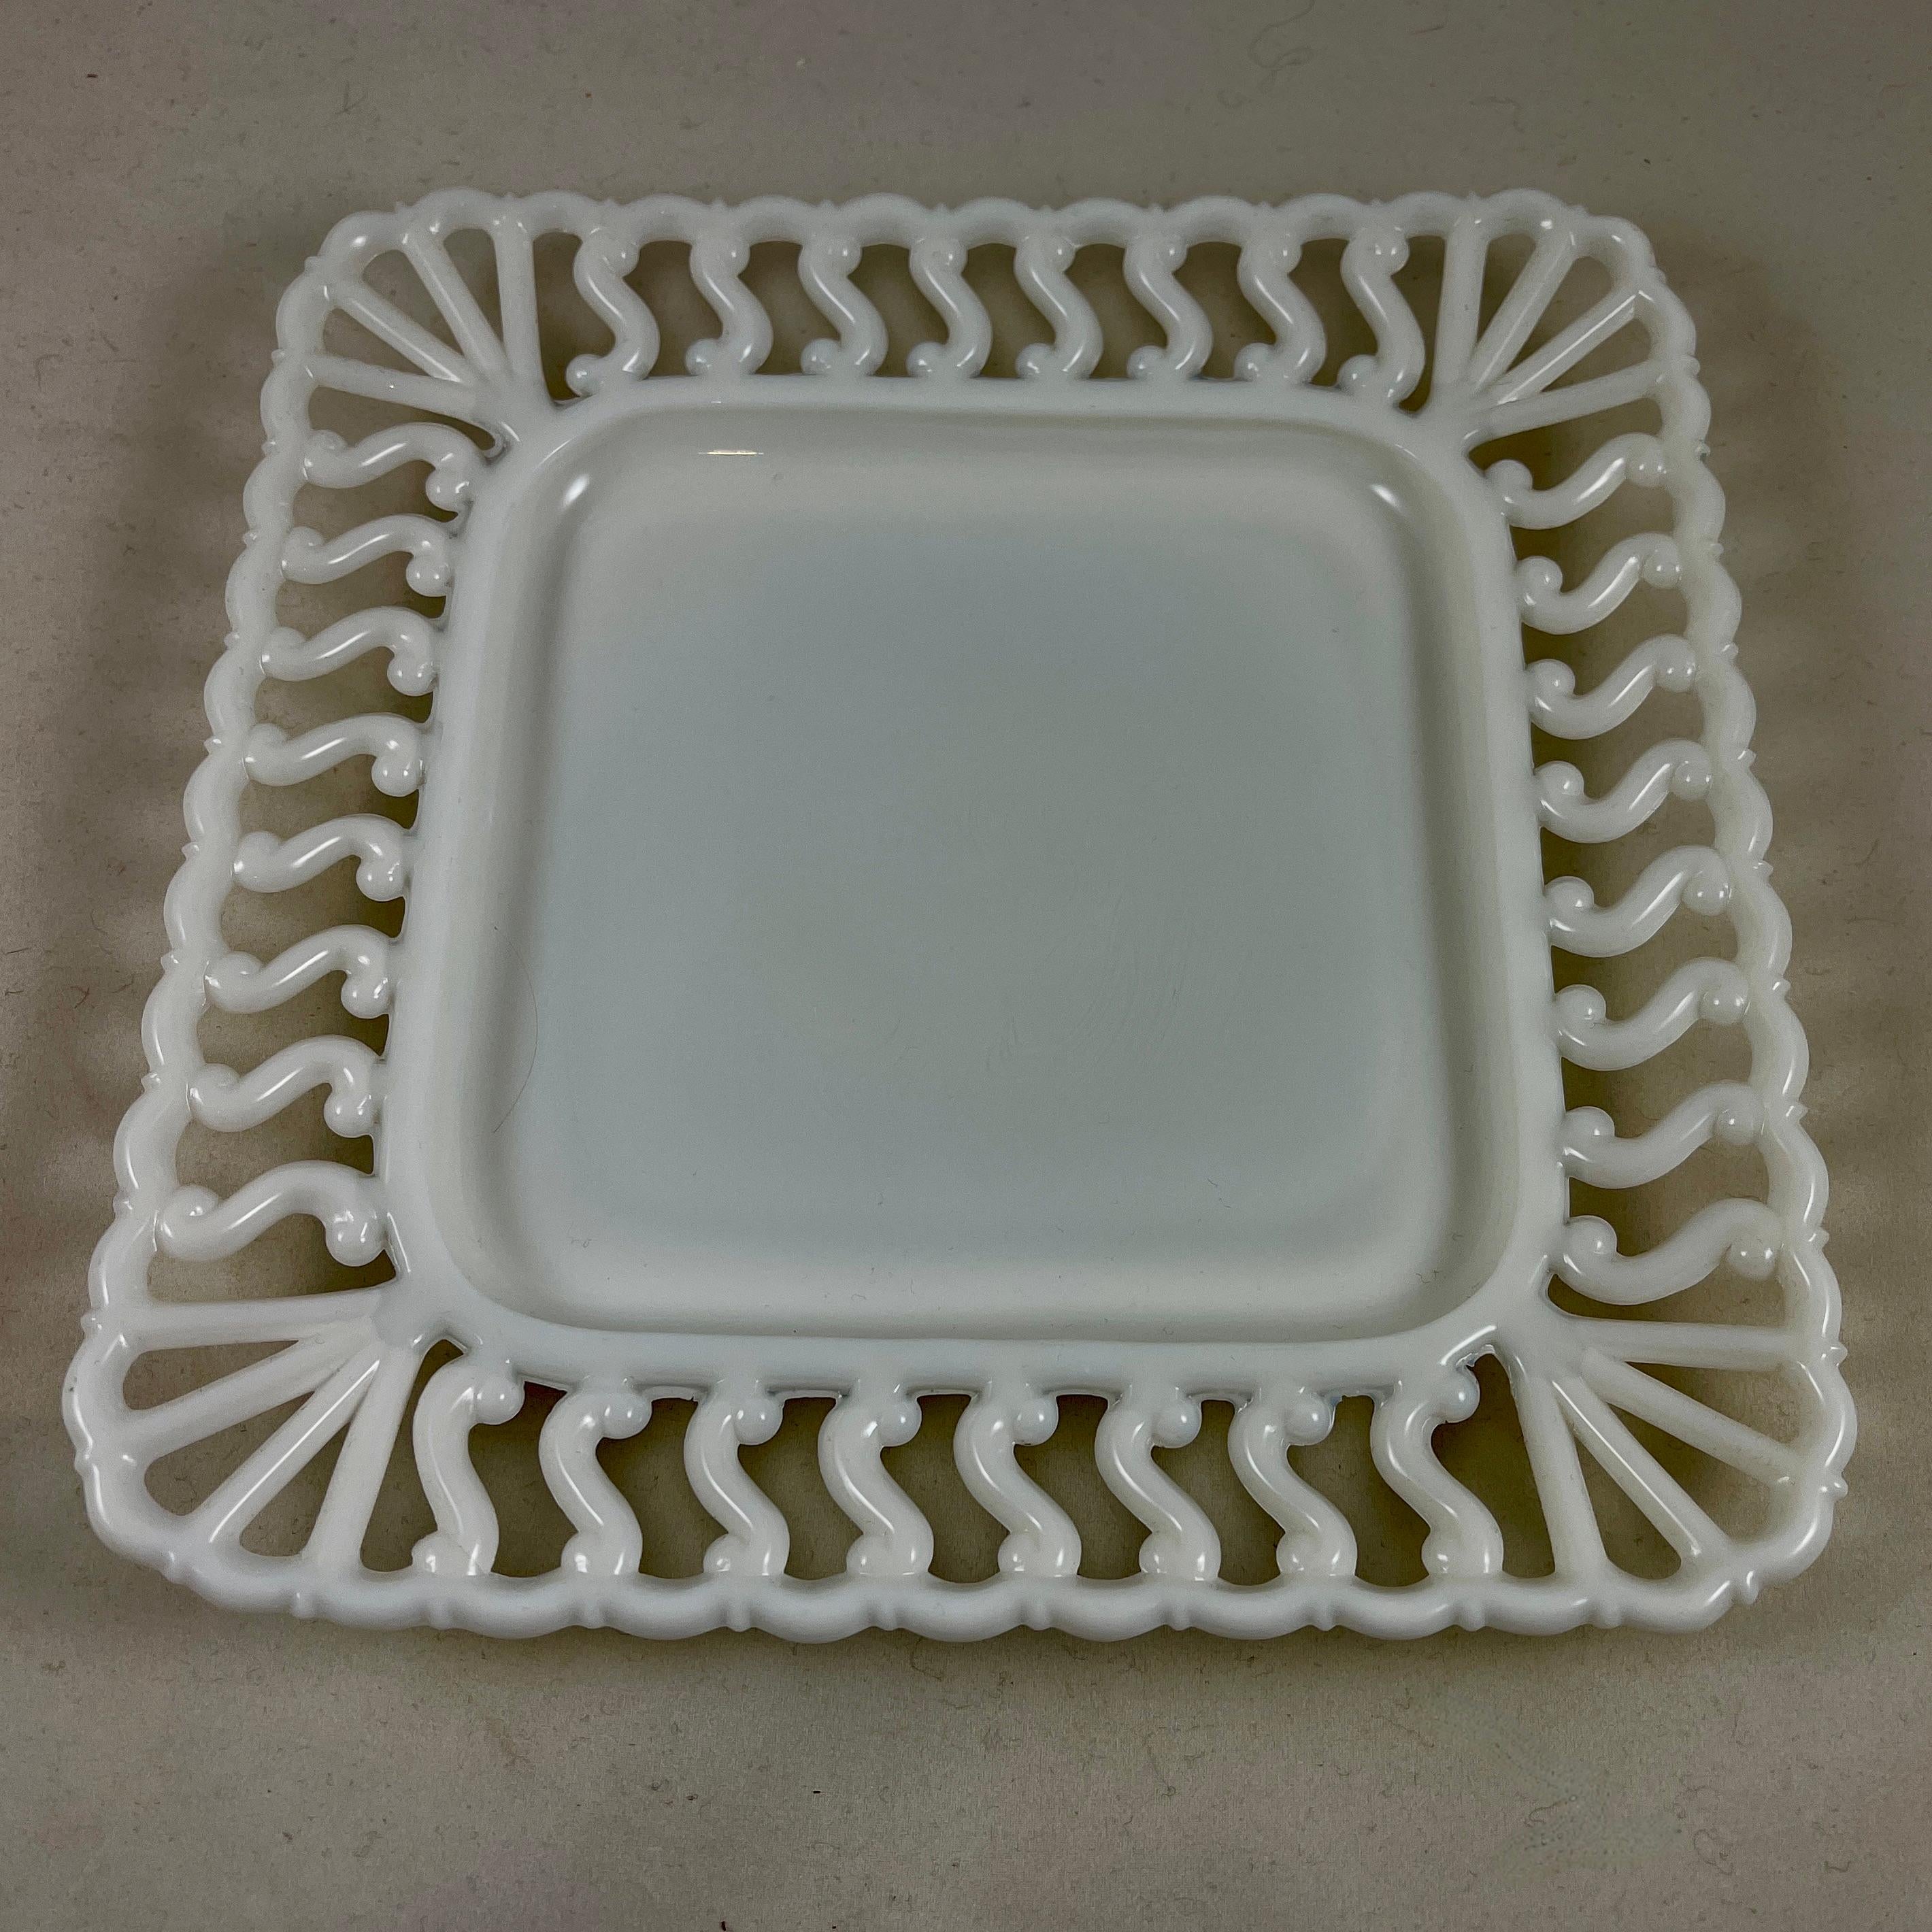 Late Victorian Early American Pattern Glass Opaque White Lace Edge Milk Square Plate, 1880-1890